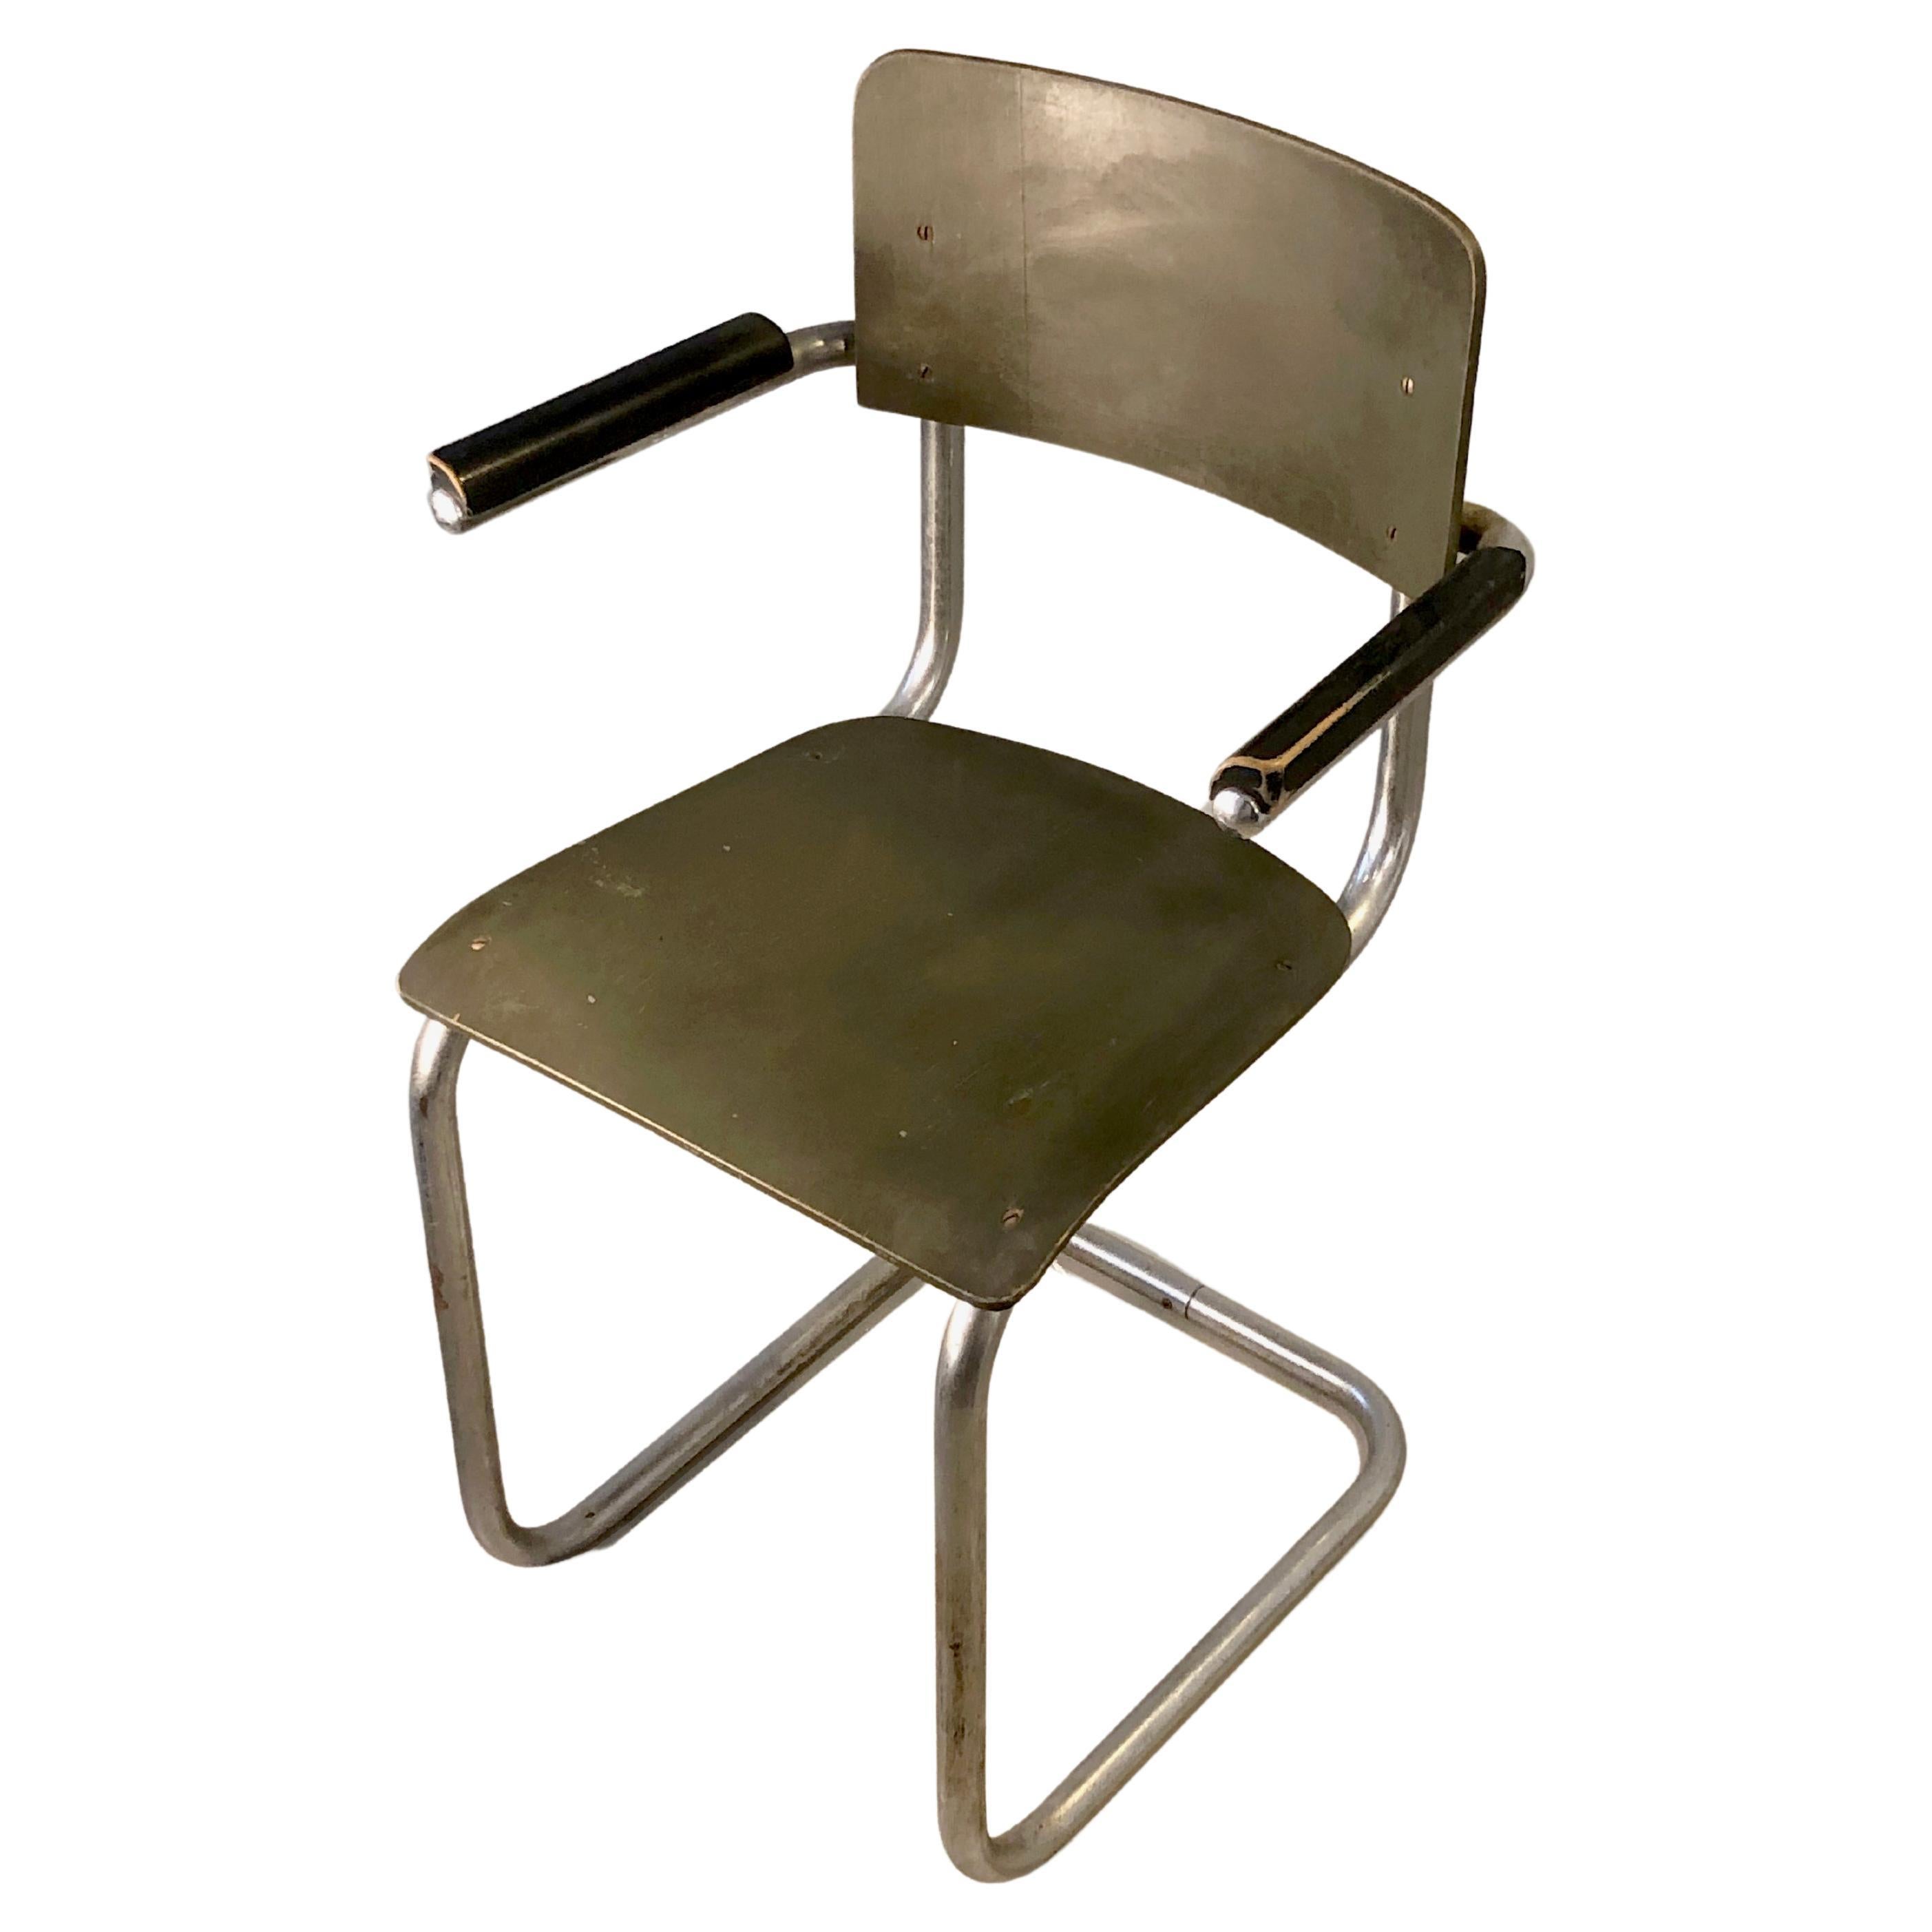 An Early MODERNIST BAUHAUS CHAIR by MART STAM for MAUSER WERKE, Germany 1930